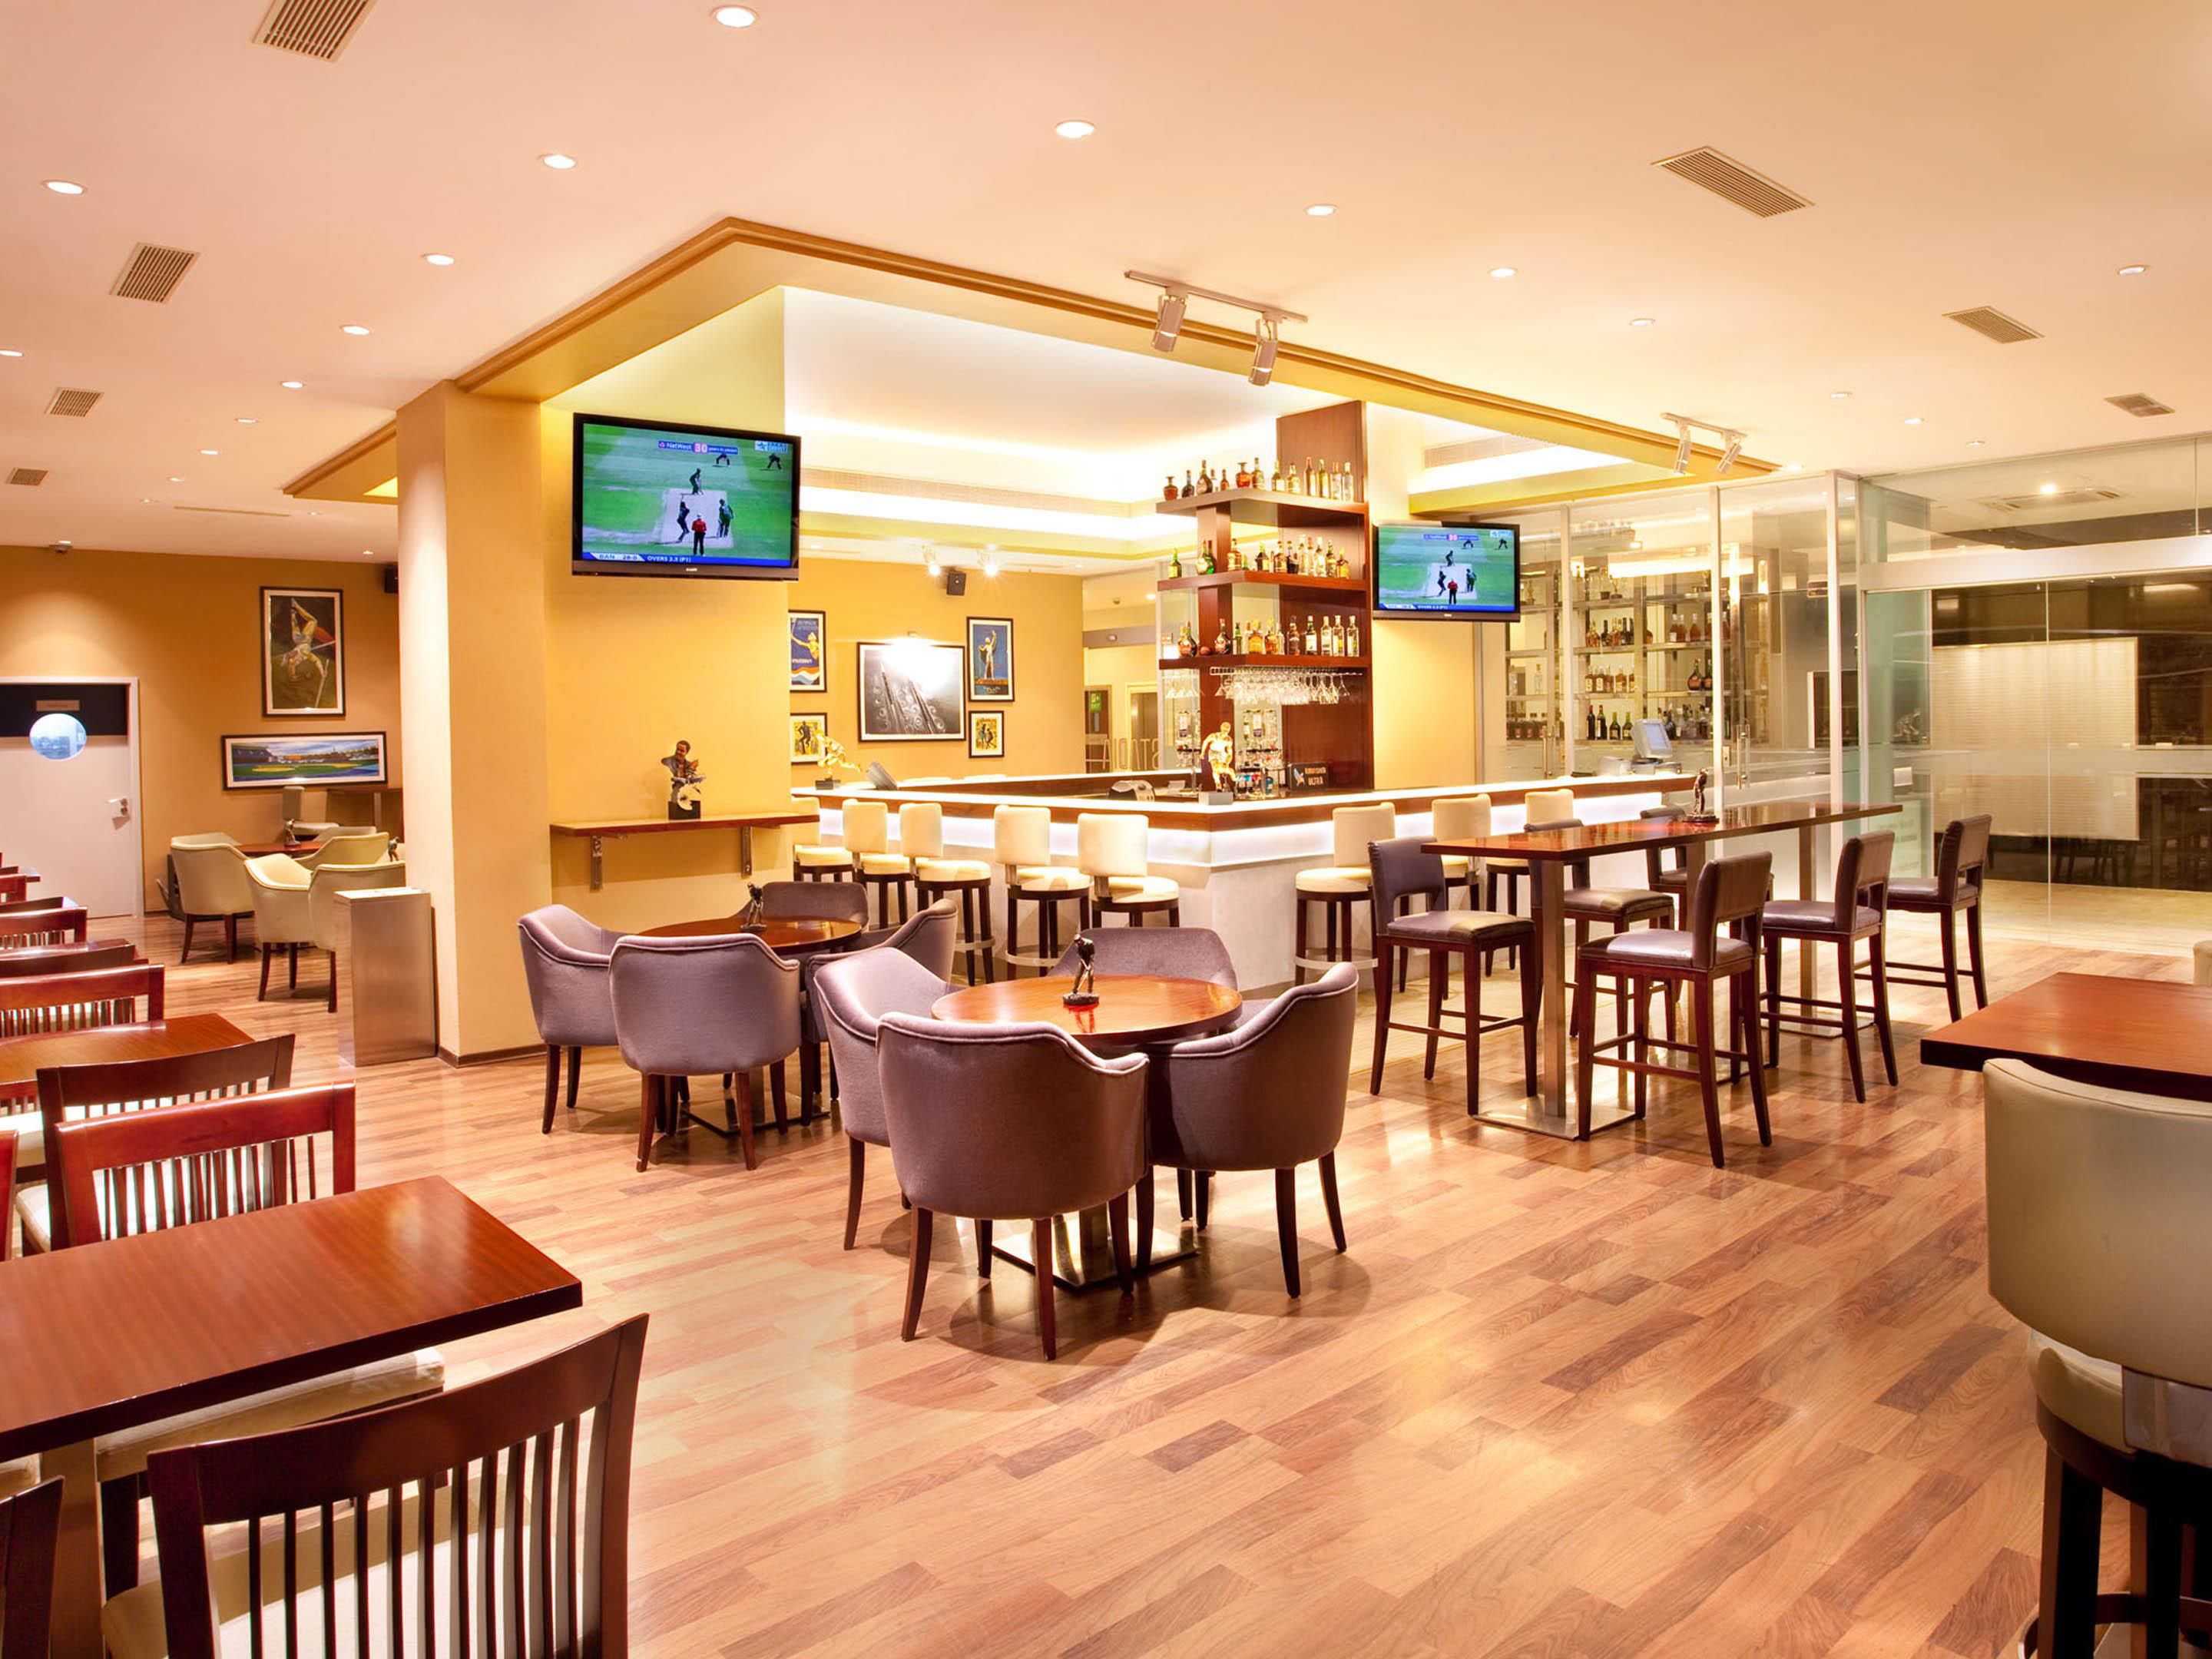 Experience the exclusive sports-themed bar at Holiday Inn Cochin - Stadia. Be captivated by its trendy seating, pool table, vibrant music, DJ performances, and large screens broadcasting your beloved sports events. Gather your friends and family to cheer for your favorite team while relishing your preferred drink.